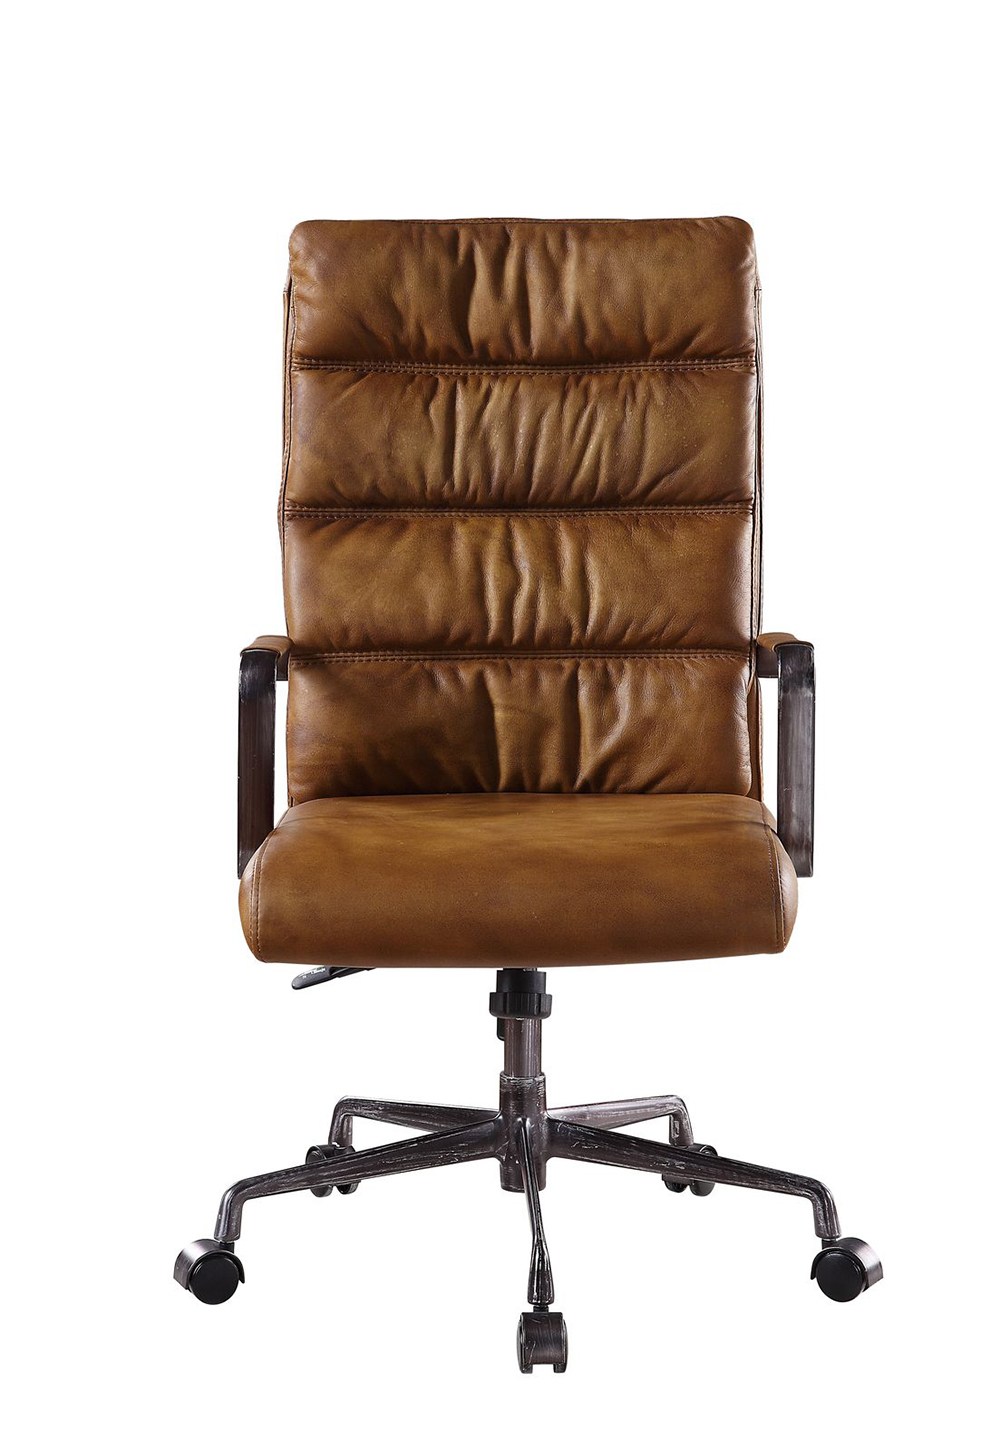 ACME Jairo Leather Upholstered Swivel Office Chair, with High Backrest, and Metal Frame, for Restaurant, Cafe, Tavern, Office, Living Room - Brown